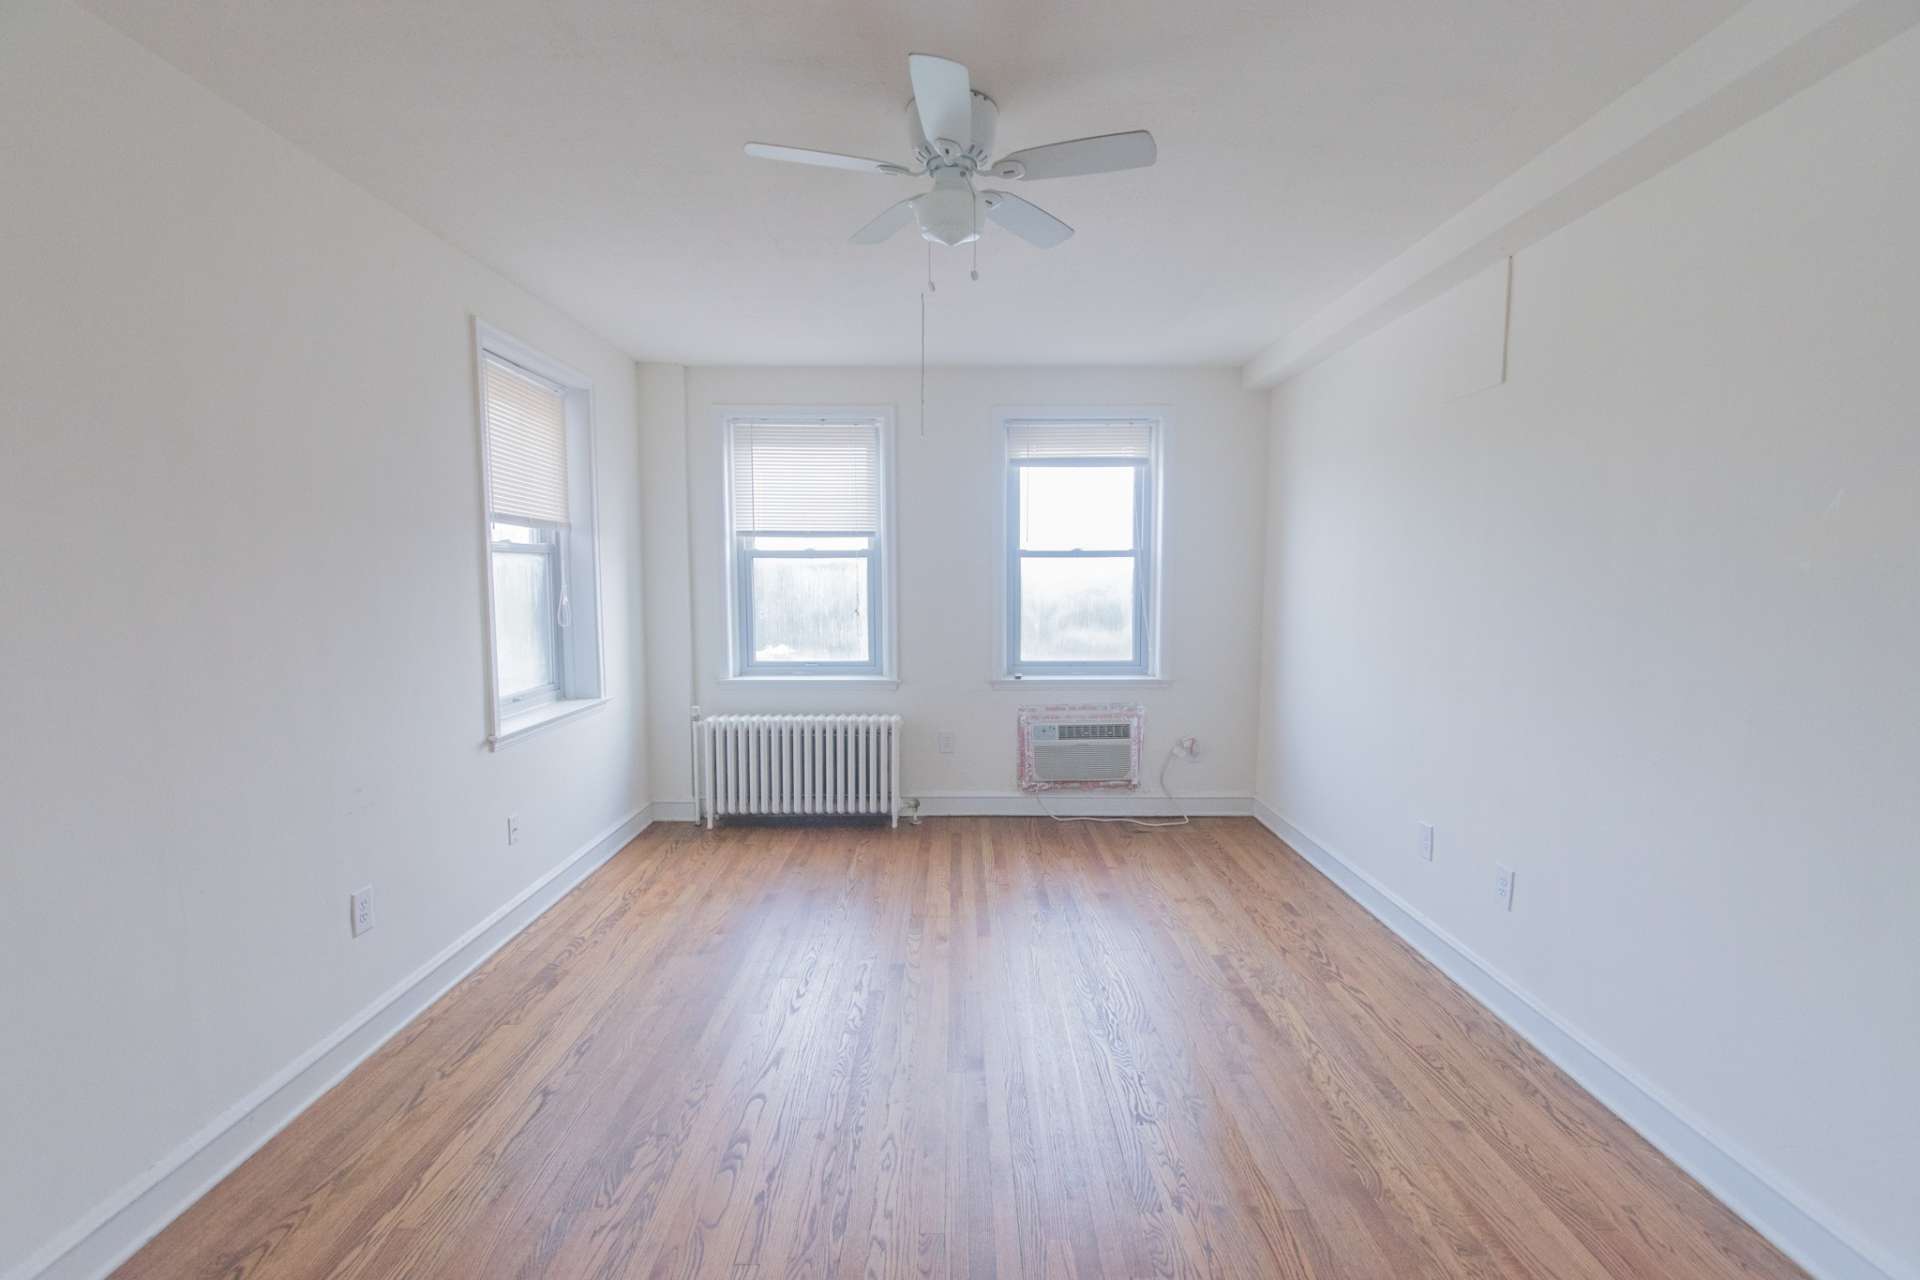 Living room area of an apartment unfurnished, fitted with vinyl flooring, a ceiling fan, and huge windows